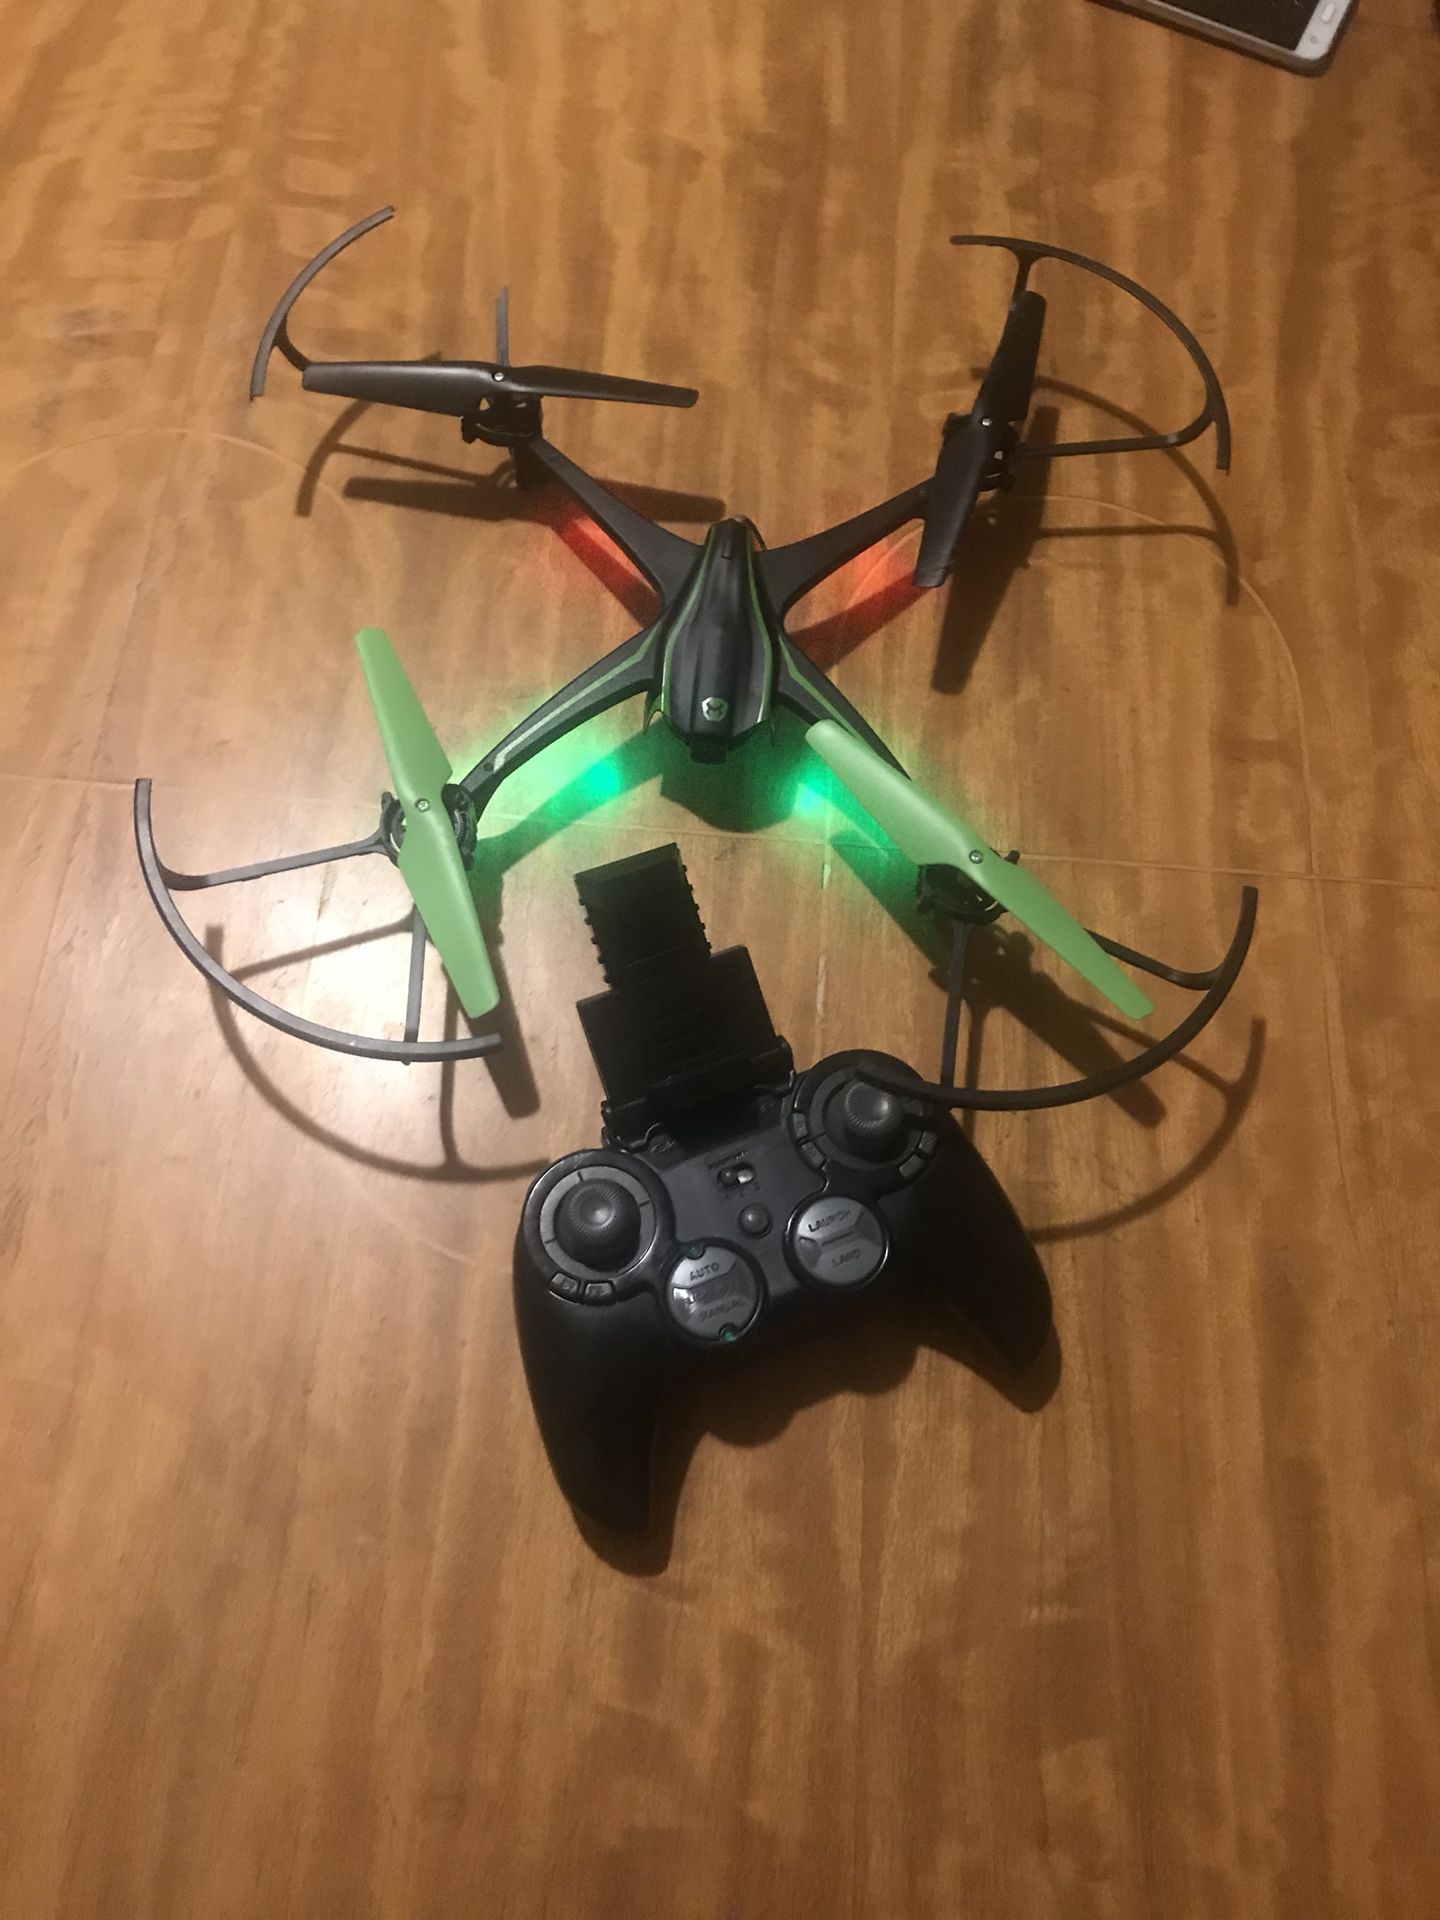 Toy drone w/ built in camera